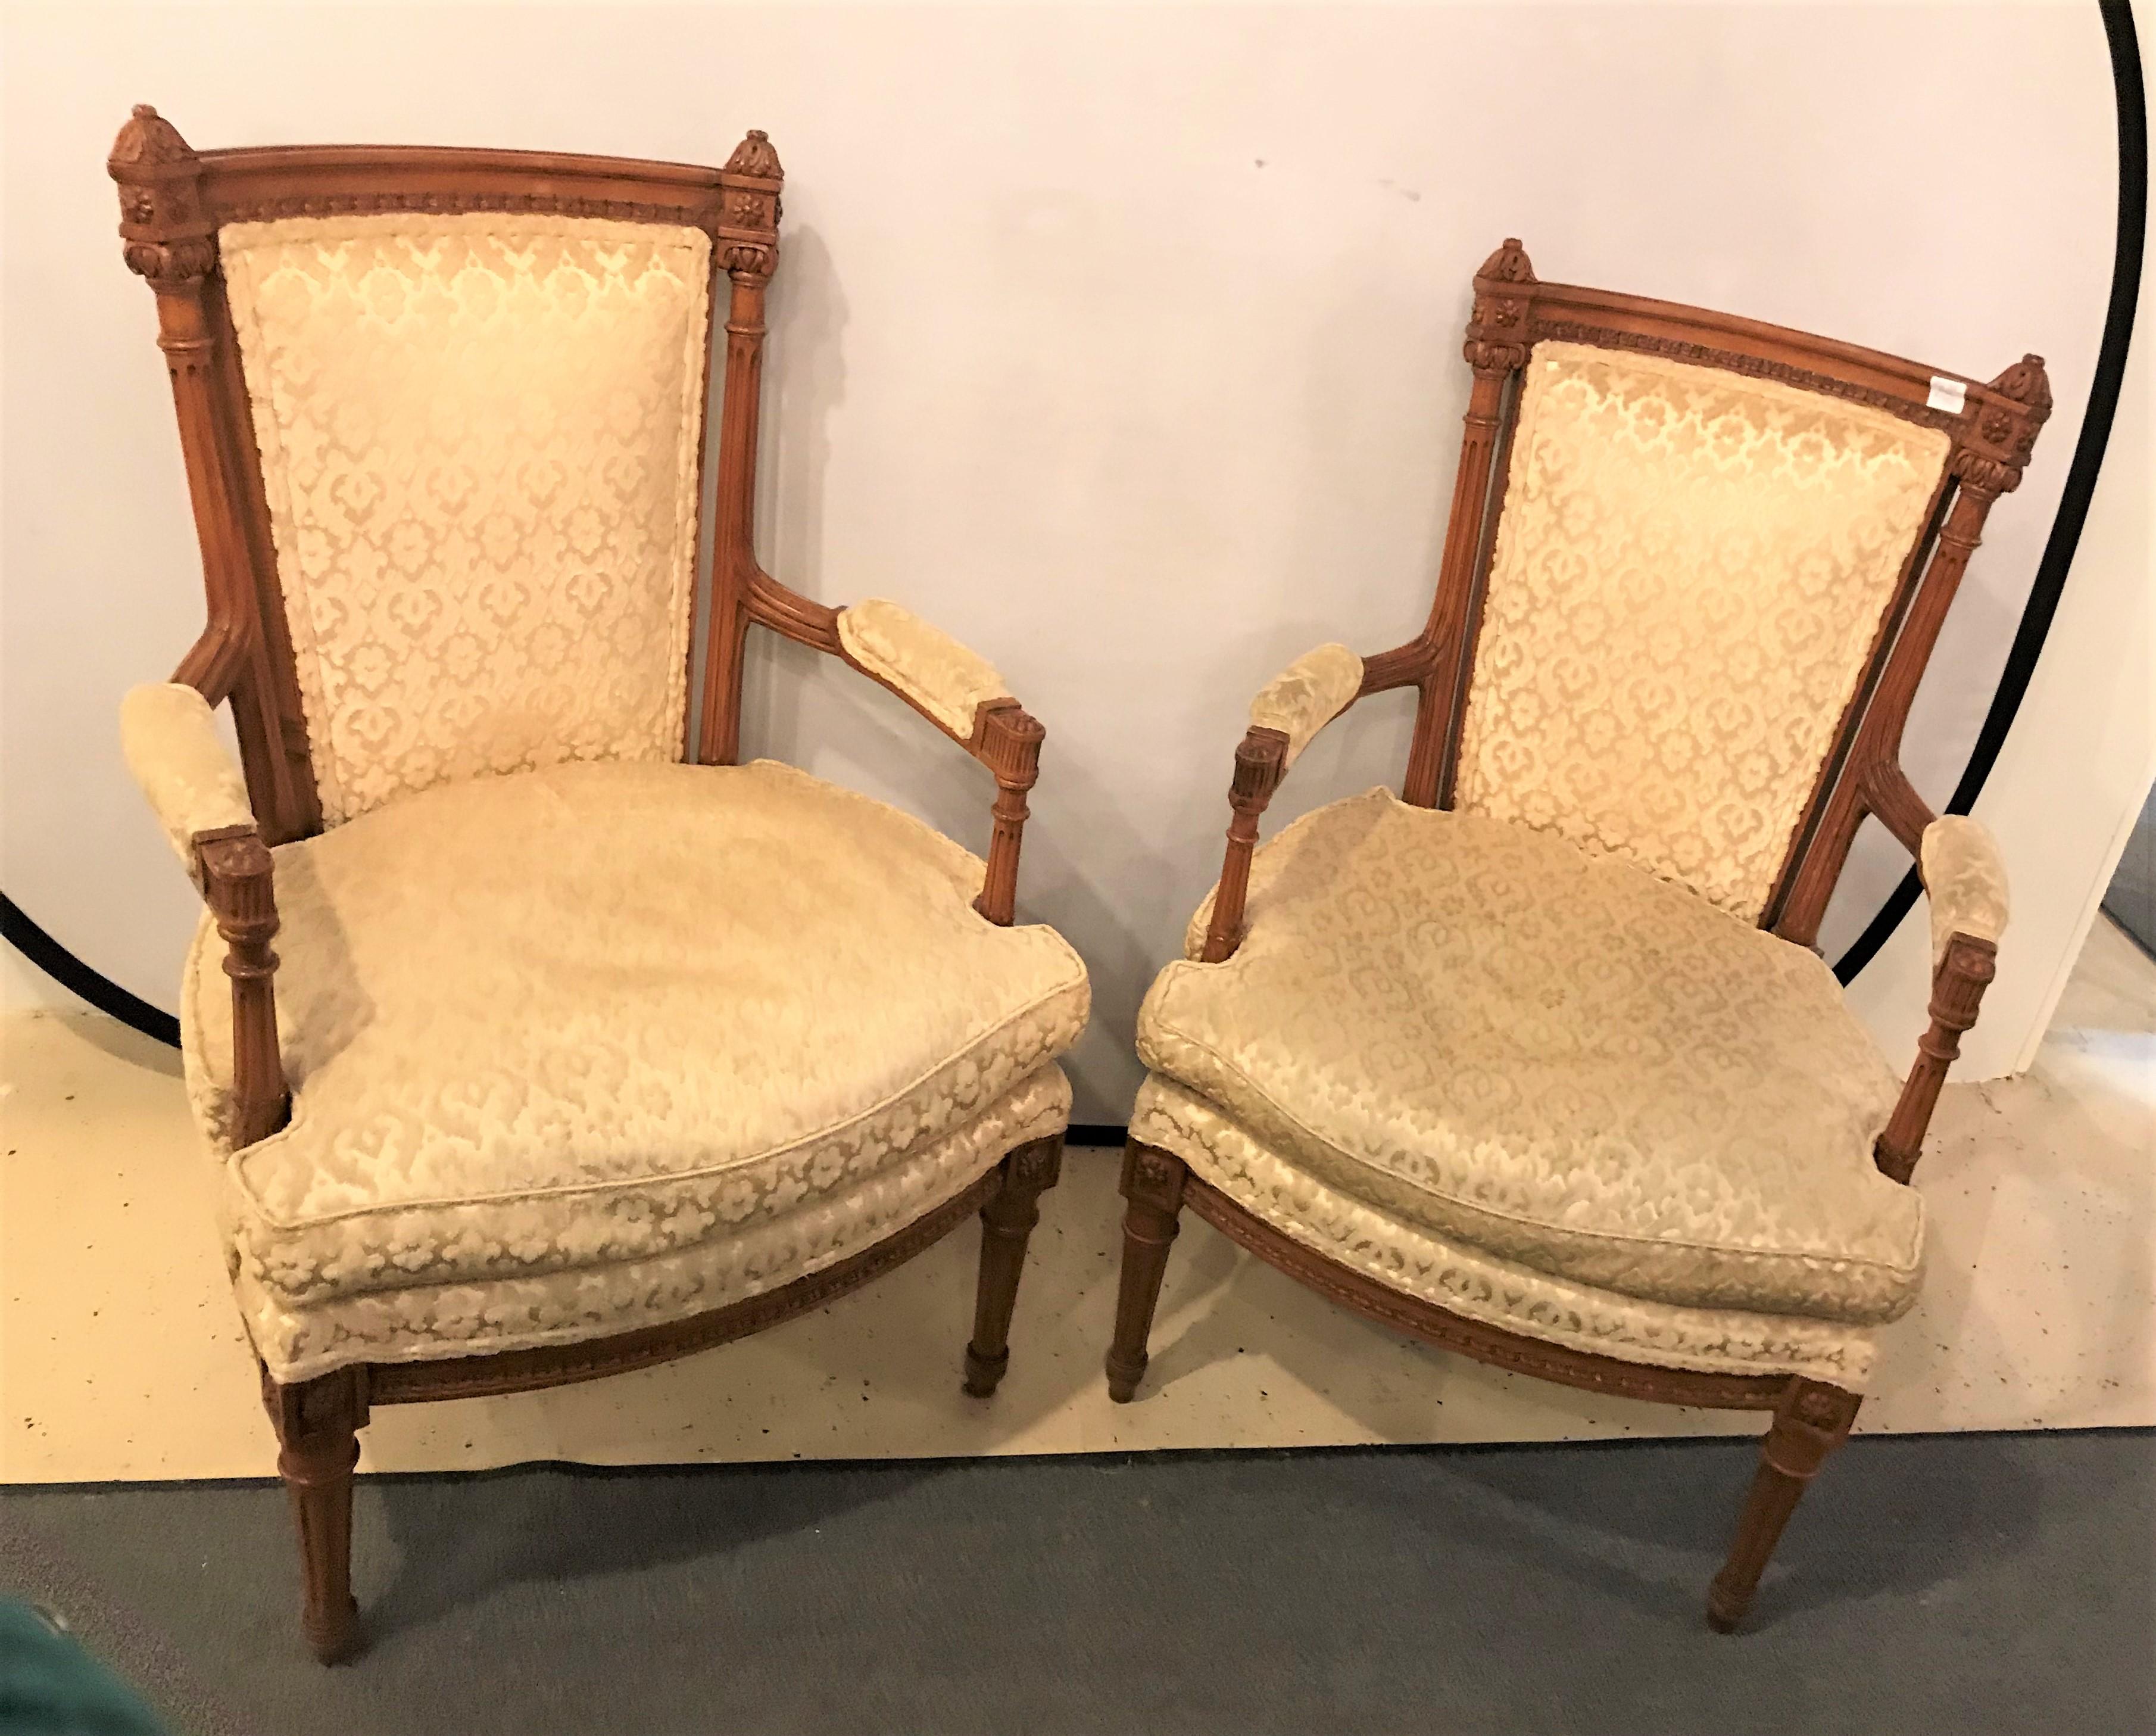 A pair of Louis XVI style bergere chairs or armchairs. Each in a nice clean upholstered frame with fine carvings.